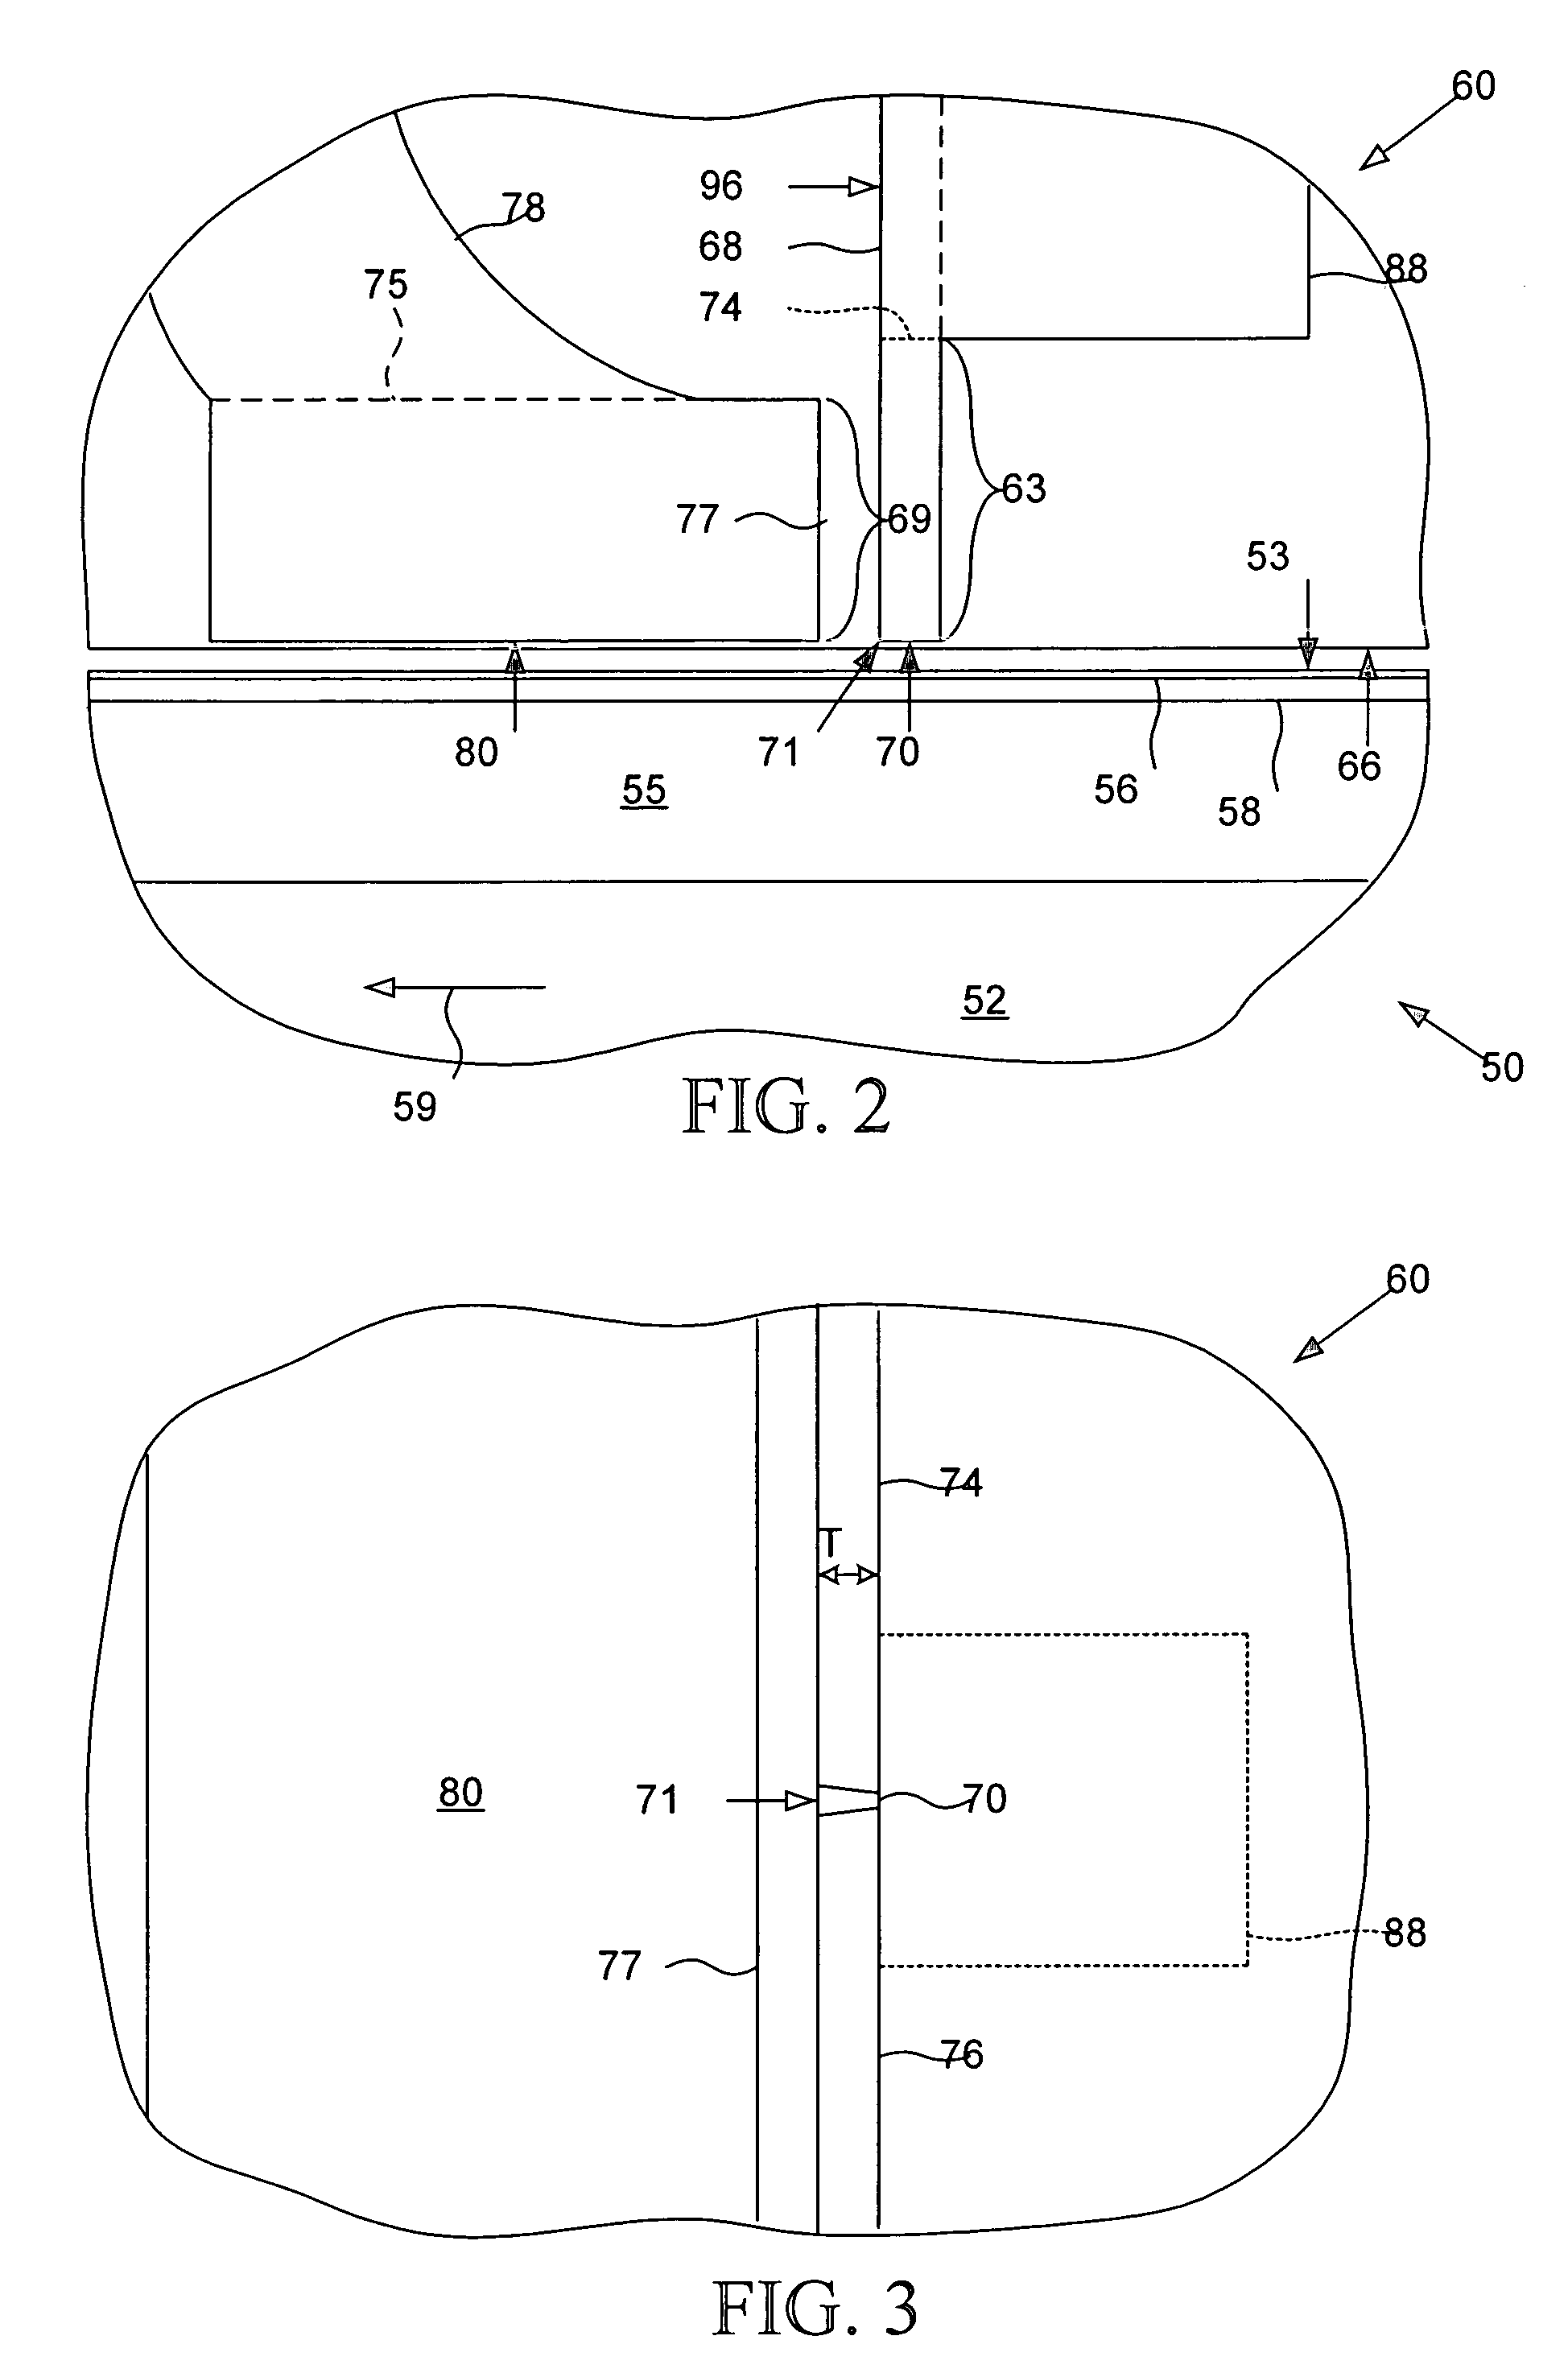 Magnetic head for perpendicular recording with hard bias structure for write pole tip